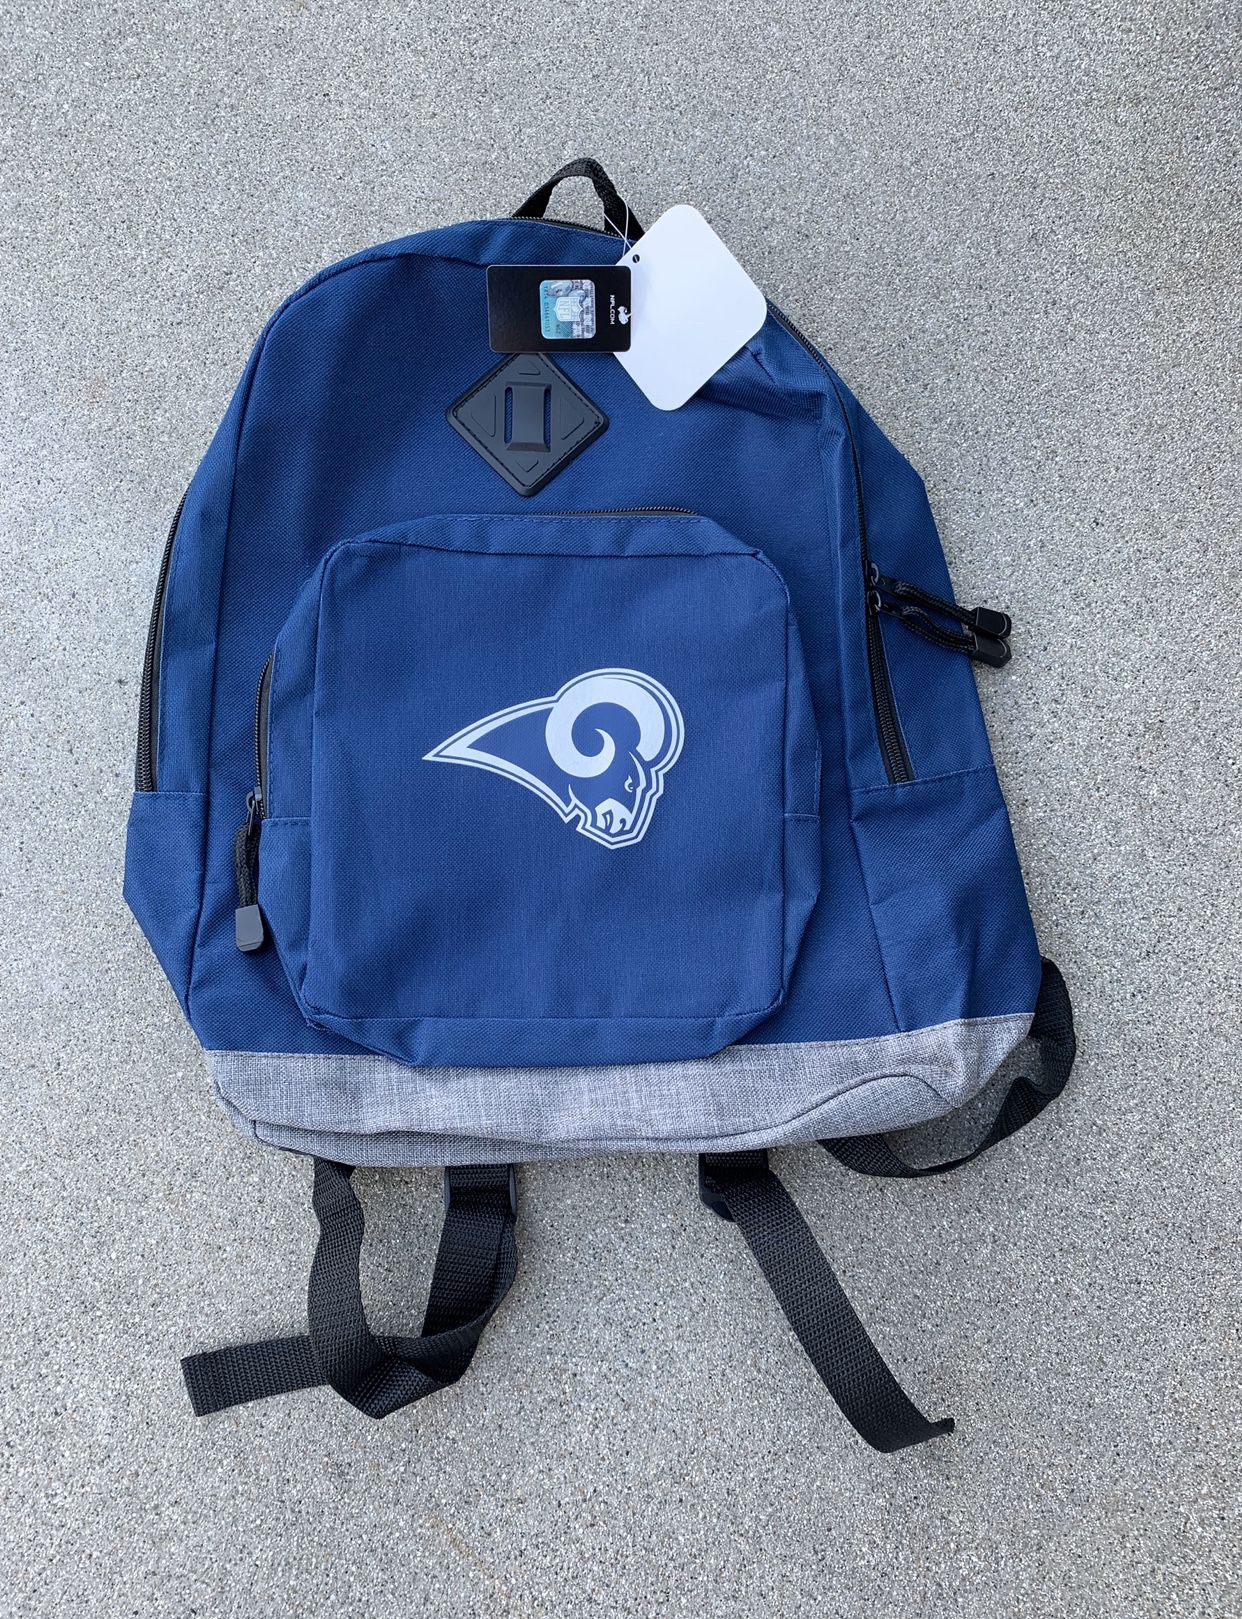 Los Angeles Rams Backpack Regular Size Authentic NFL